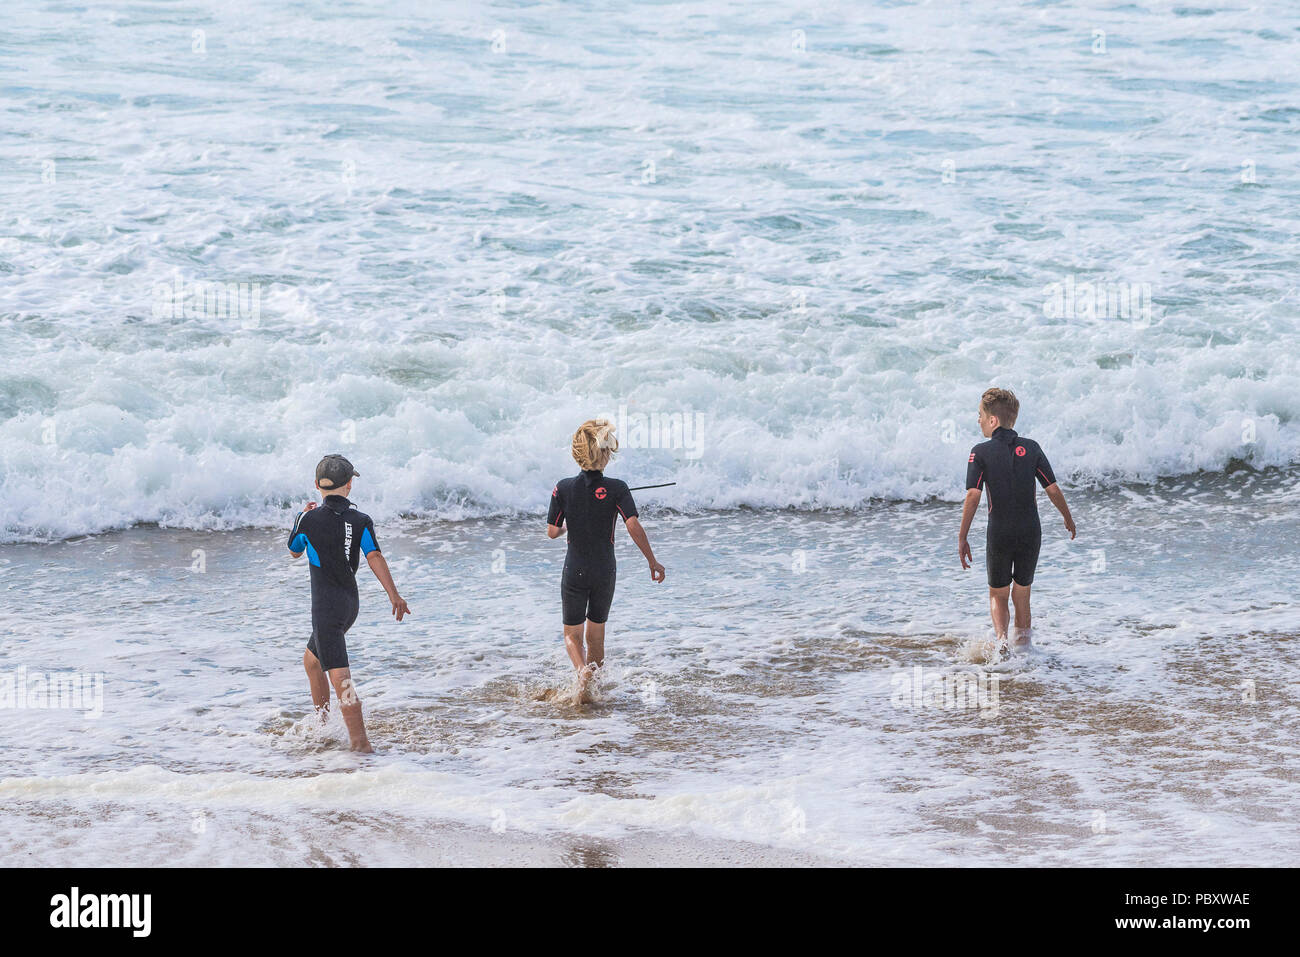 Young boys in wetsuits playing in the sea. Stock Photo